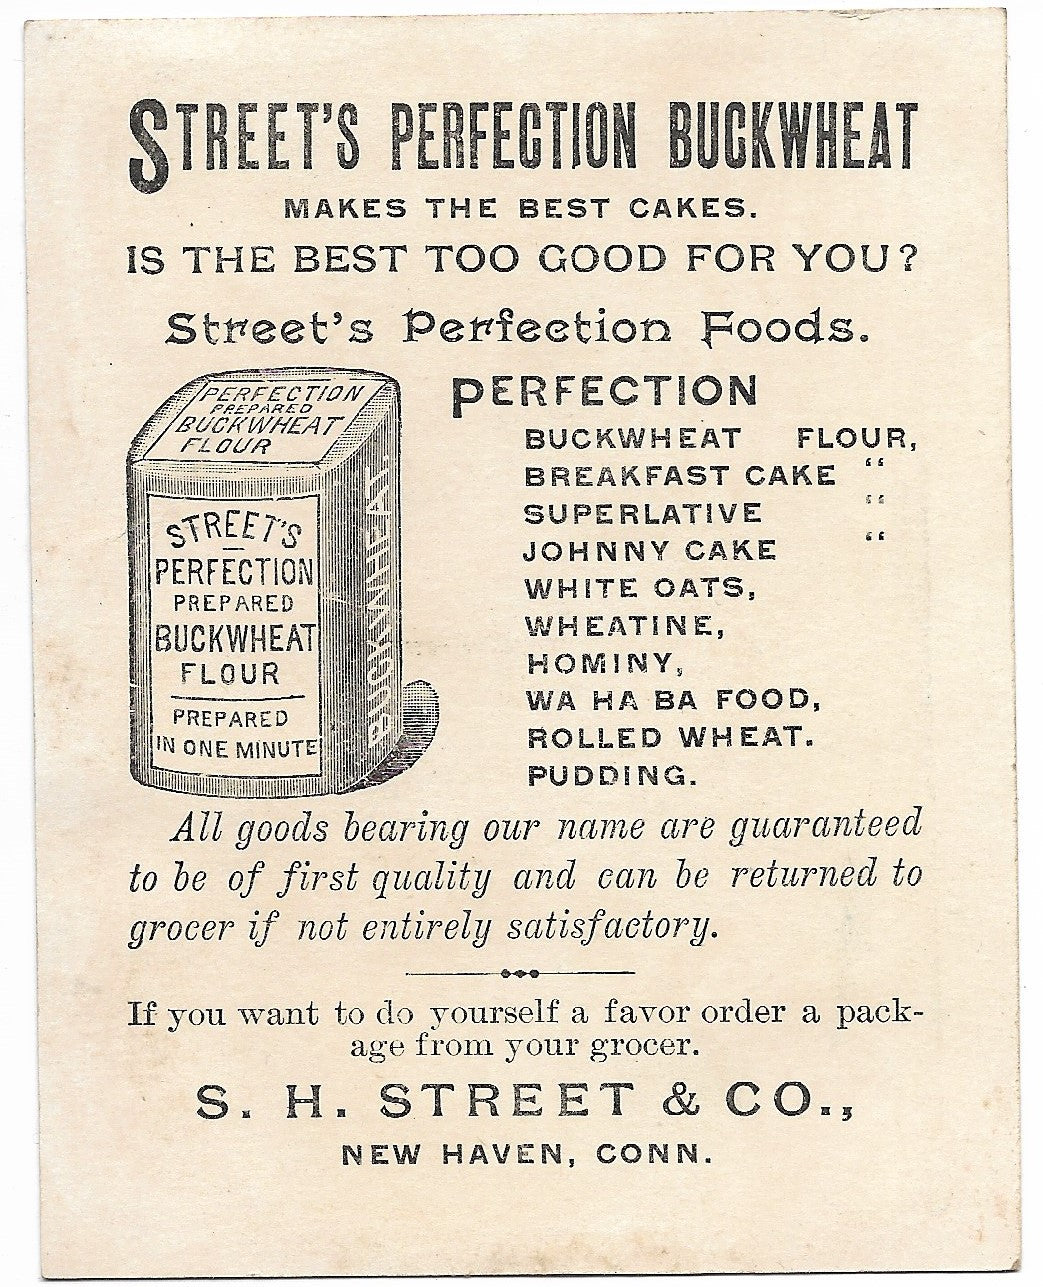 Street's Perfection Buckwheat Antique Trade Card, New Haven, CT - 3.25" x 4.25"